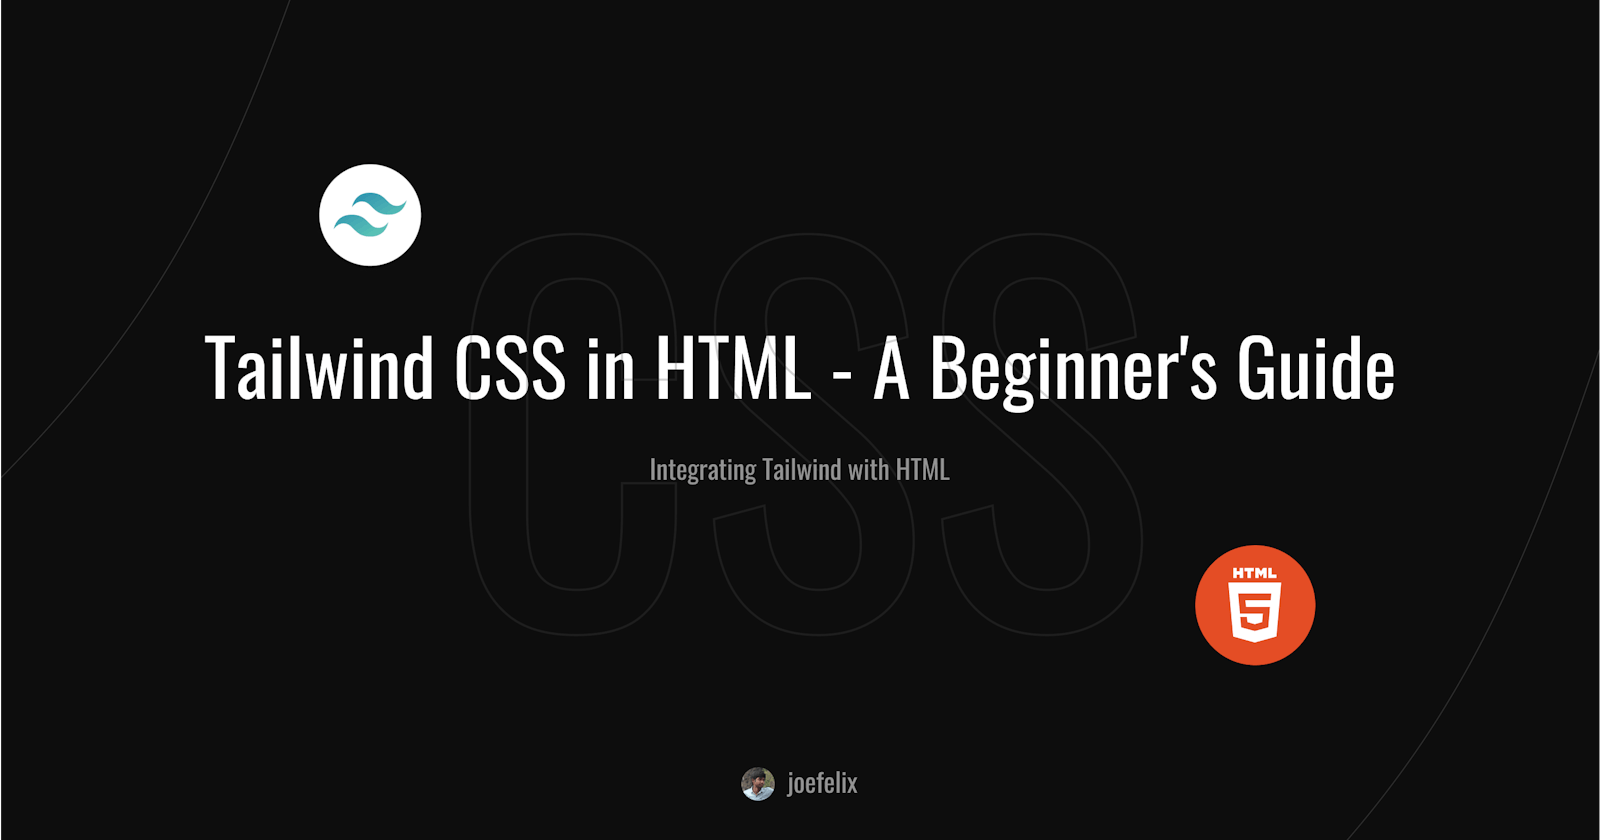 Tailwind CSS in HTML - A Beginner's Guide